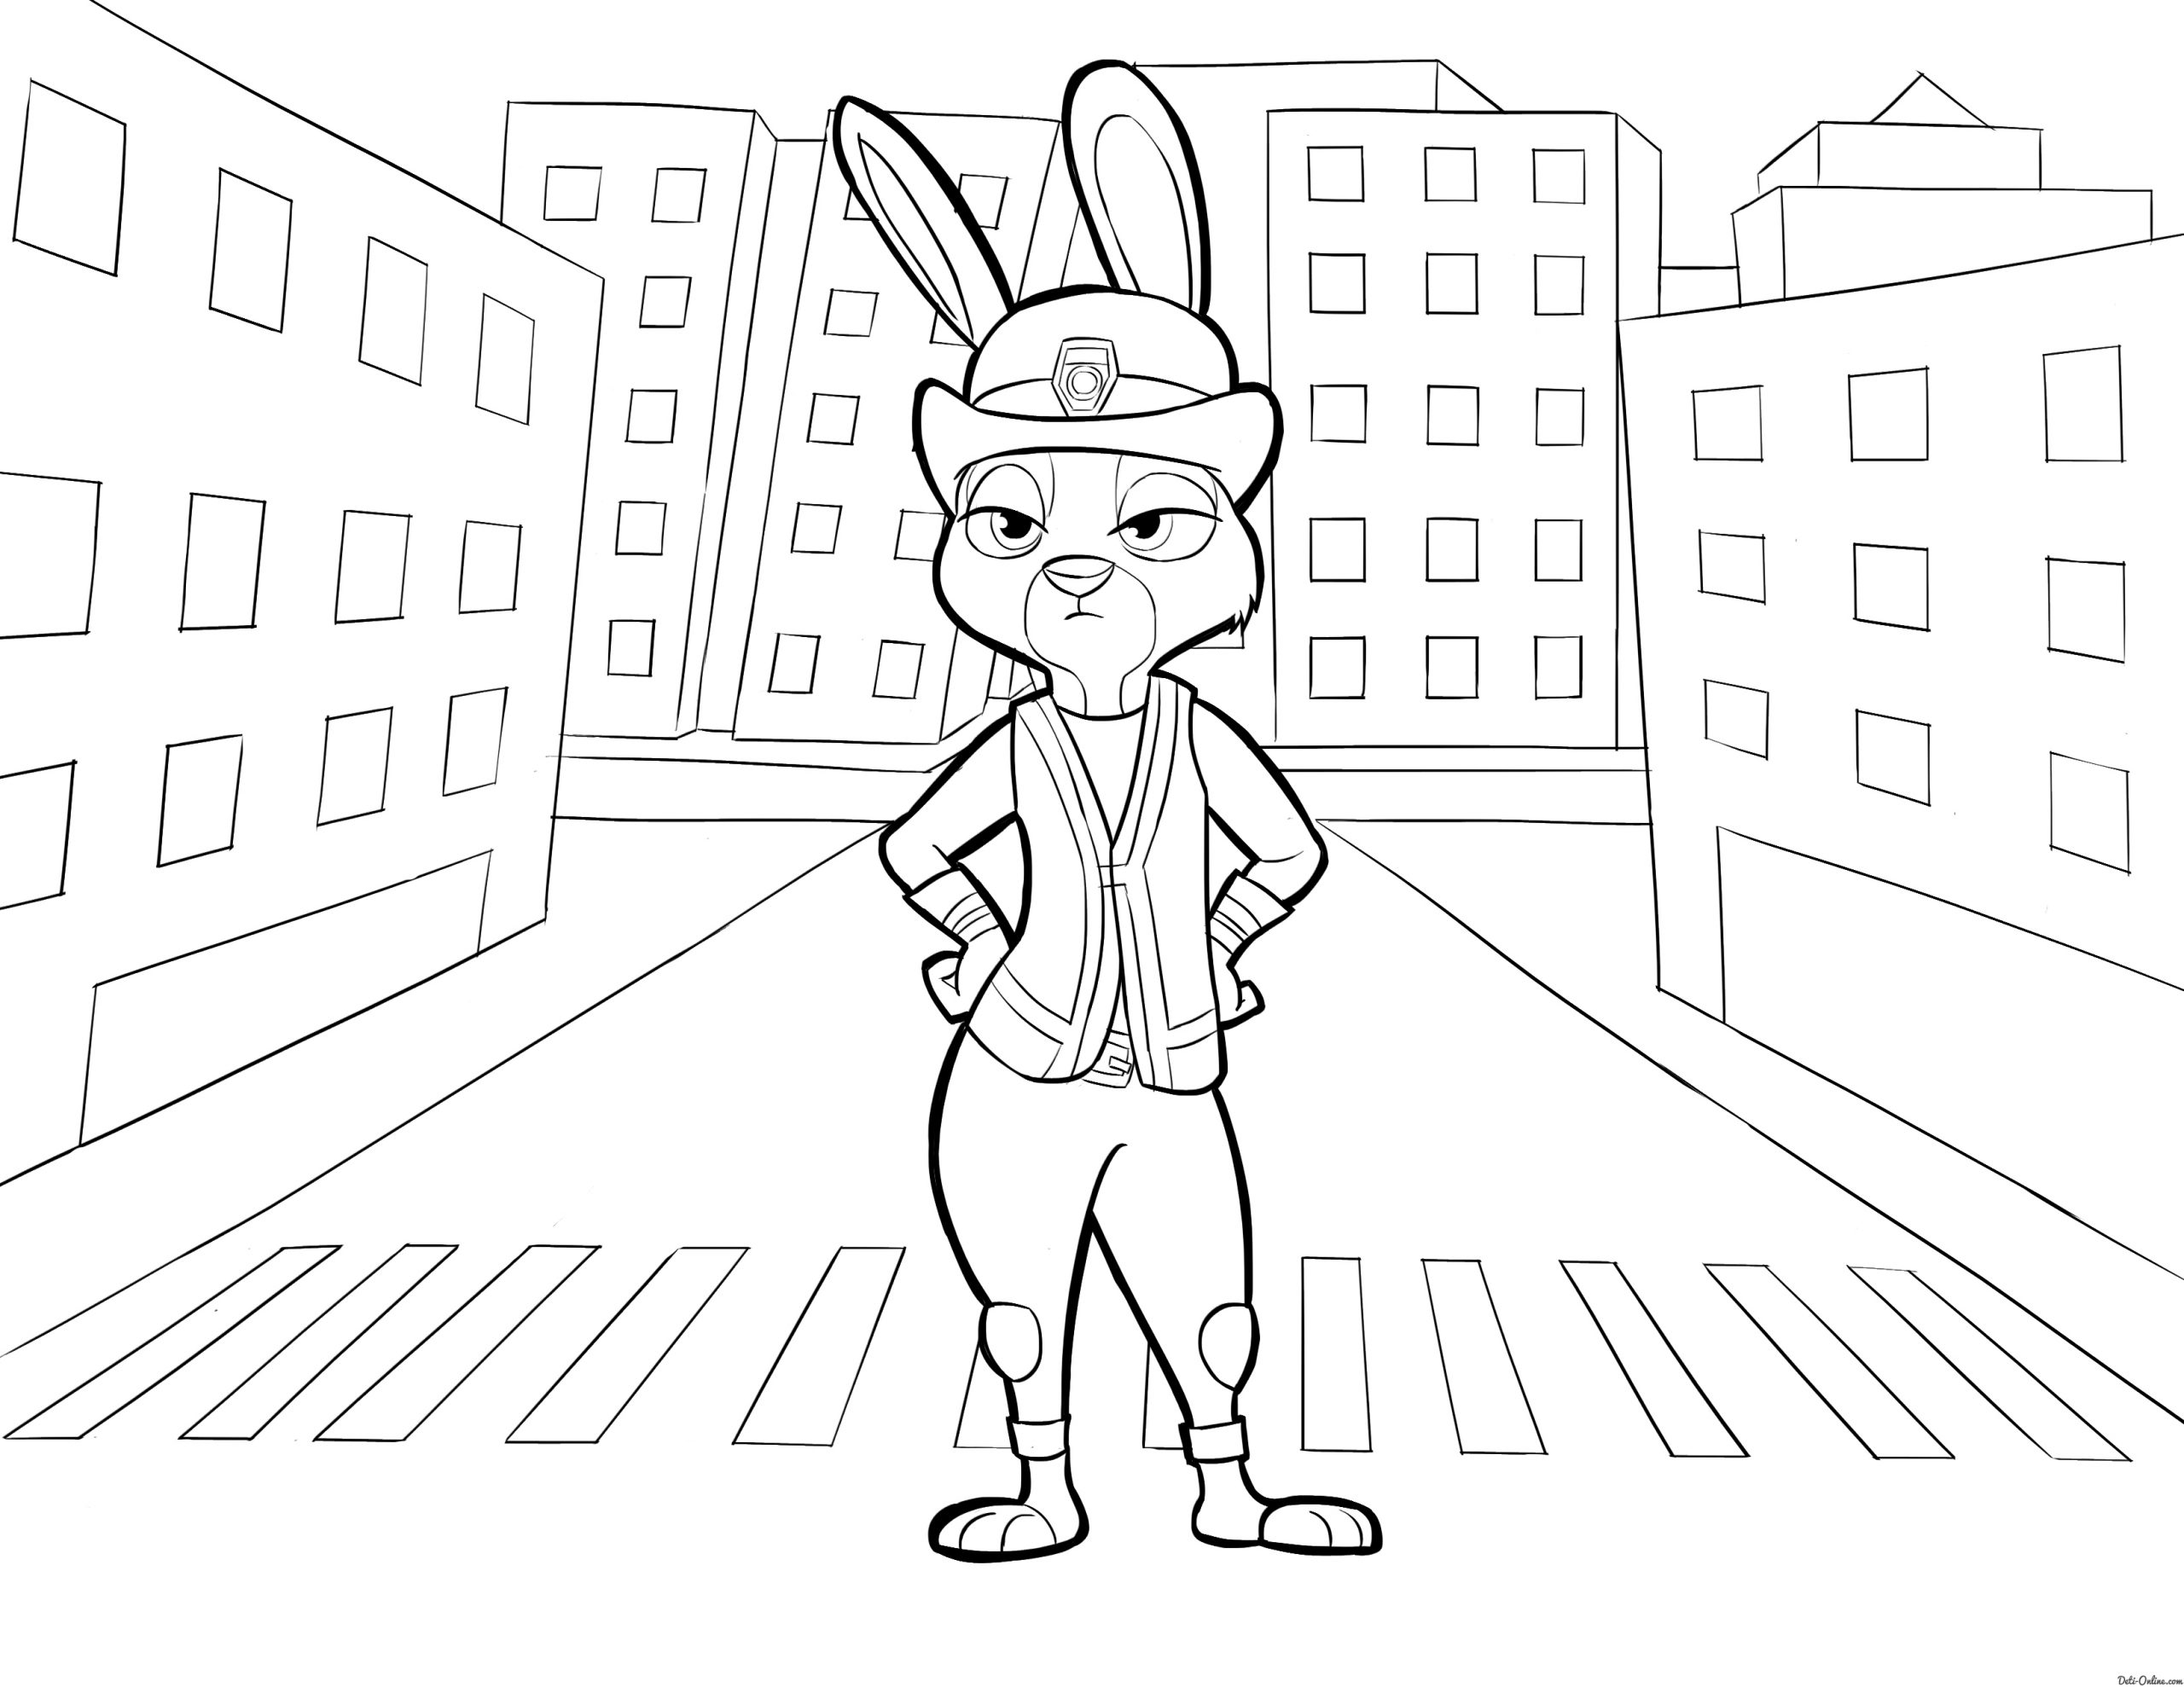 Judy in the city